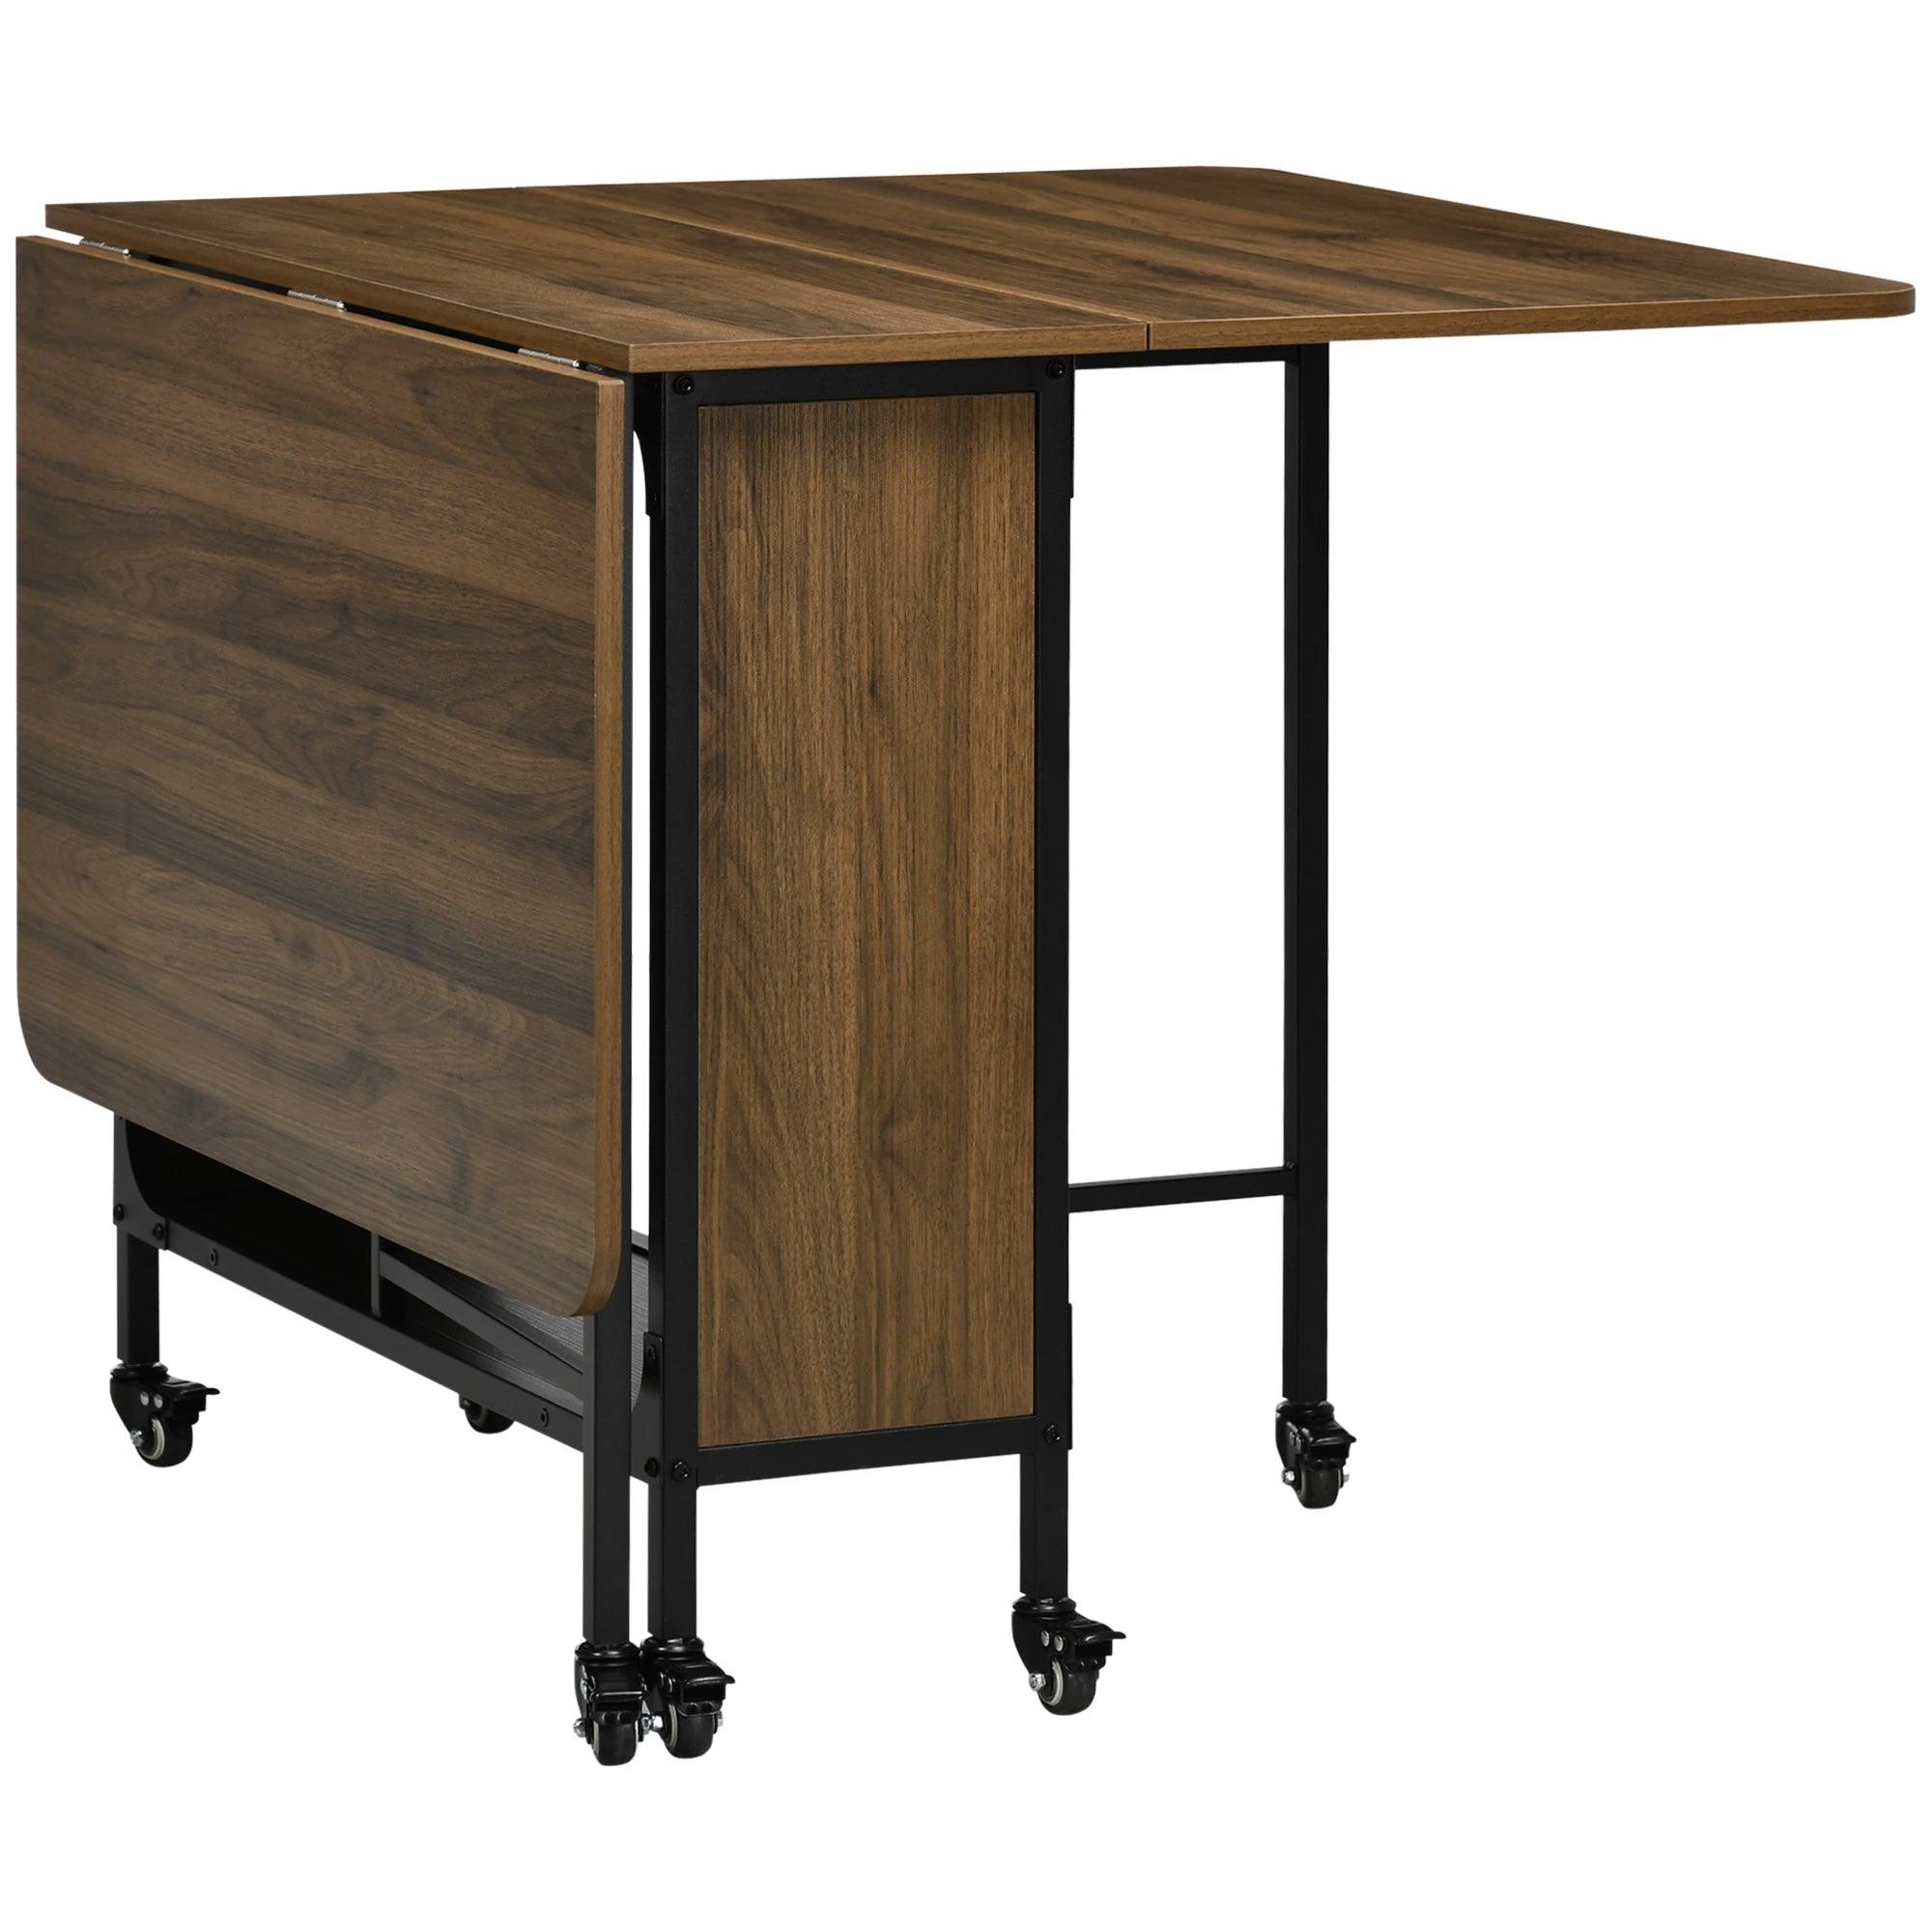 Folding Dining Table, Mobile Drop Leaf Table, Extendable Kitchen Table for Small Spaces